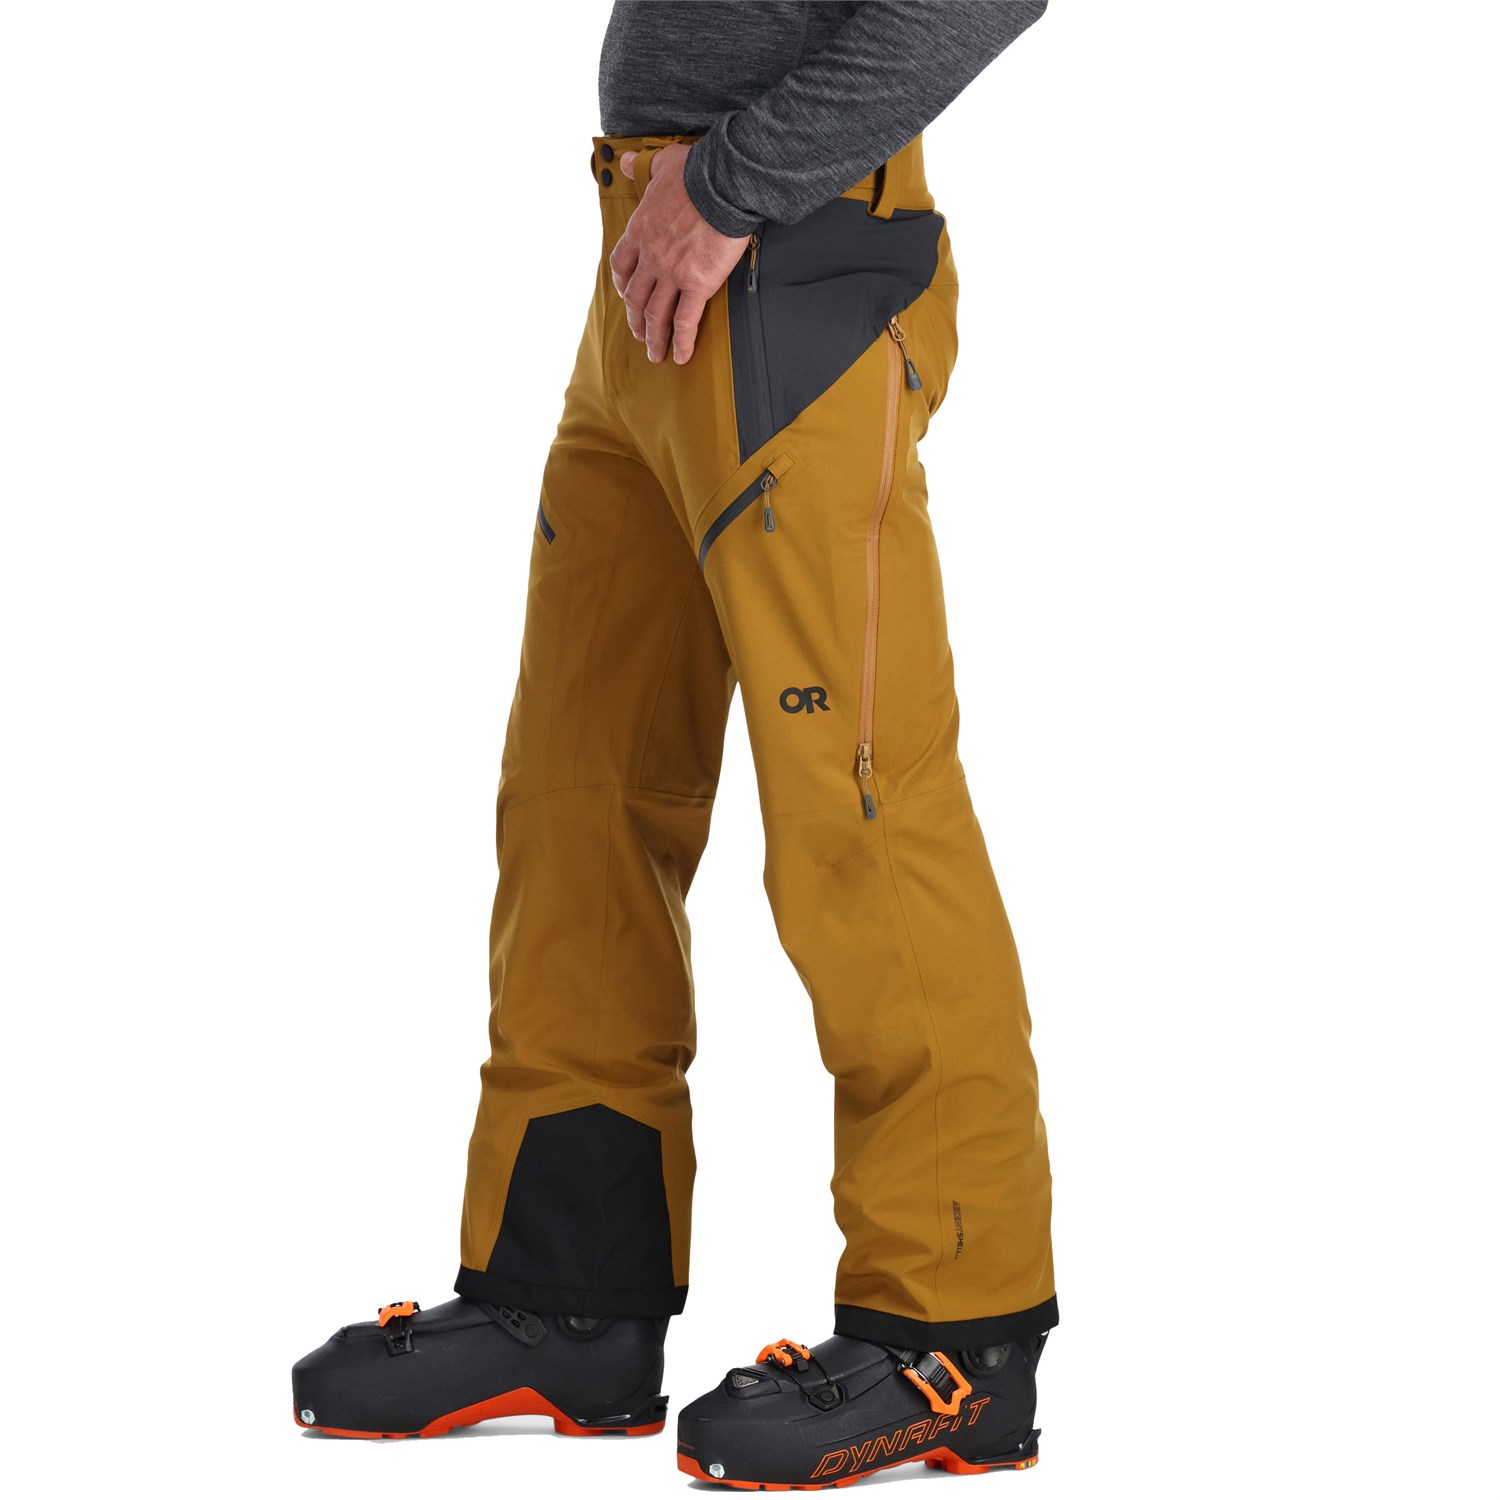 Outdoor Research Skyward II Ski Pant Review